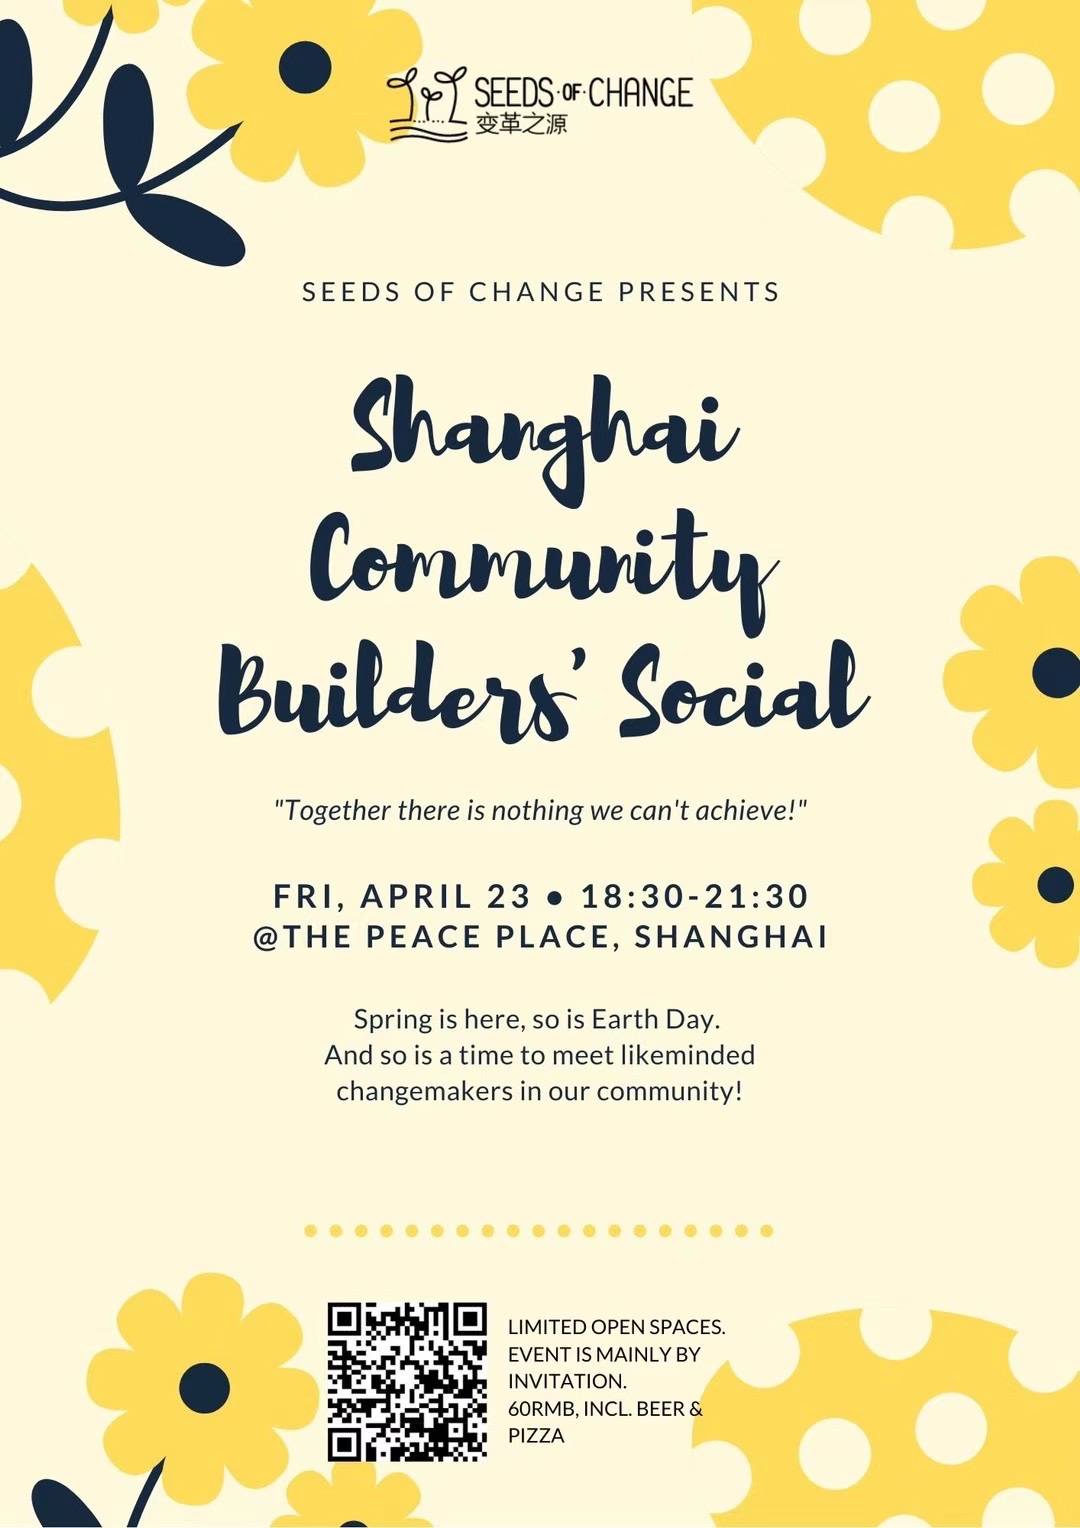 Shanghai Community Builders Social with Seeds of Change | Shanghai Events